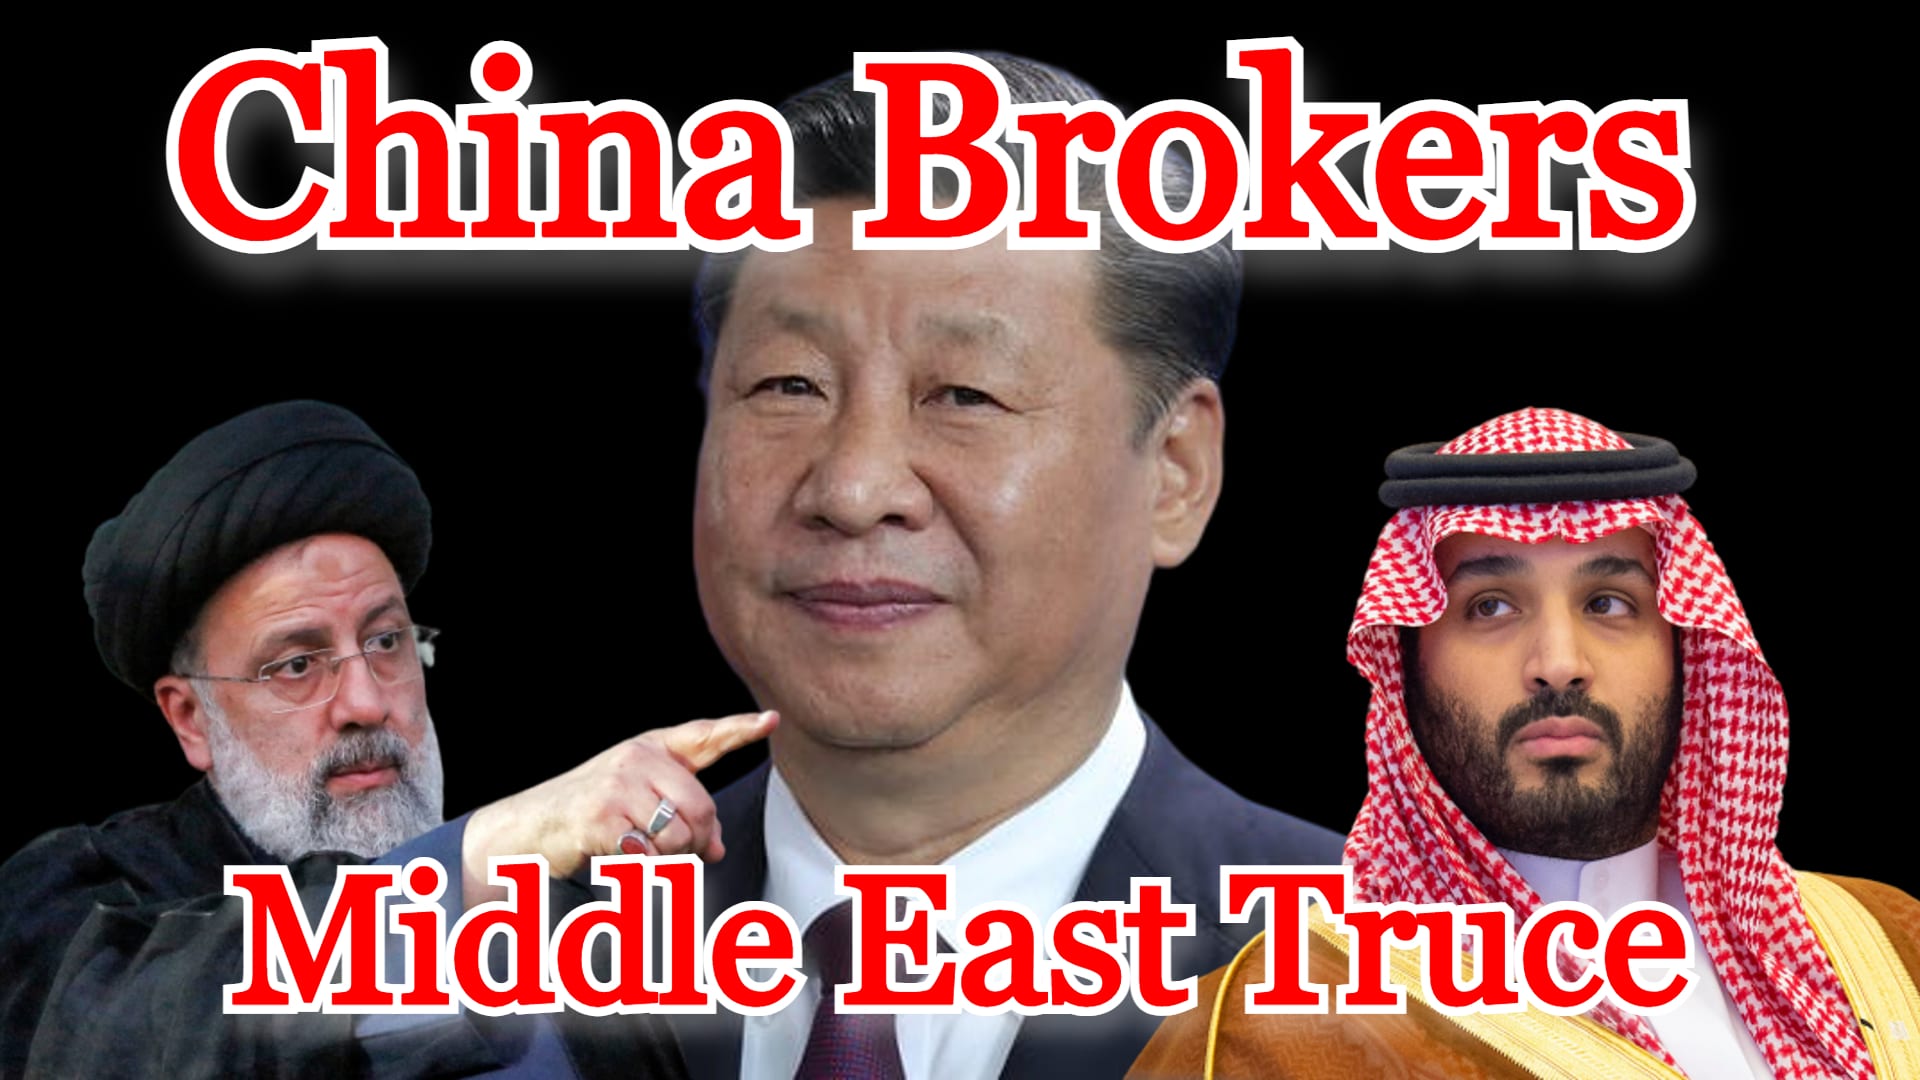 COI #395: China Brokers Middle East Truce